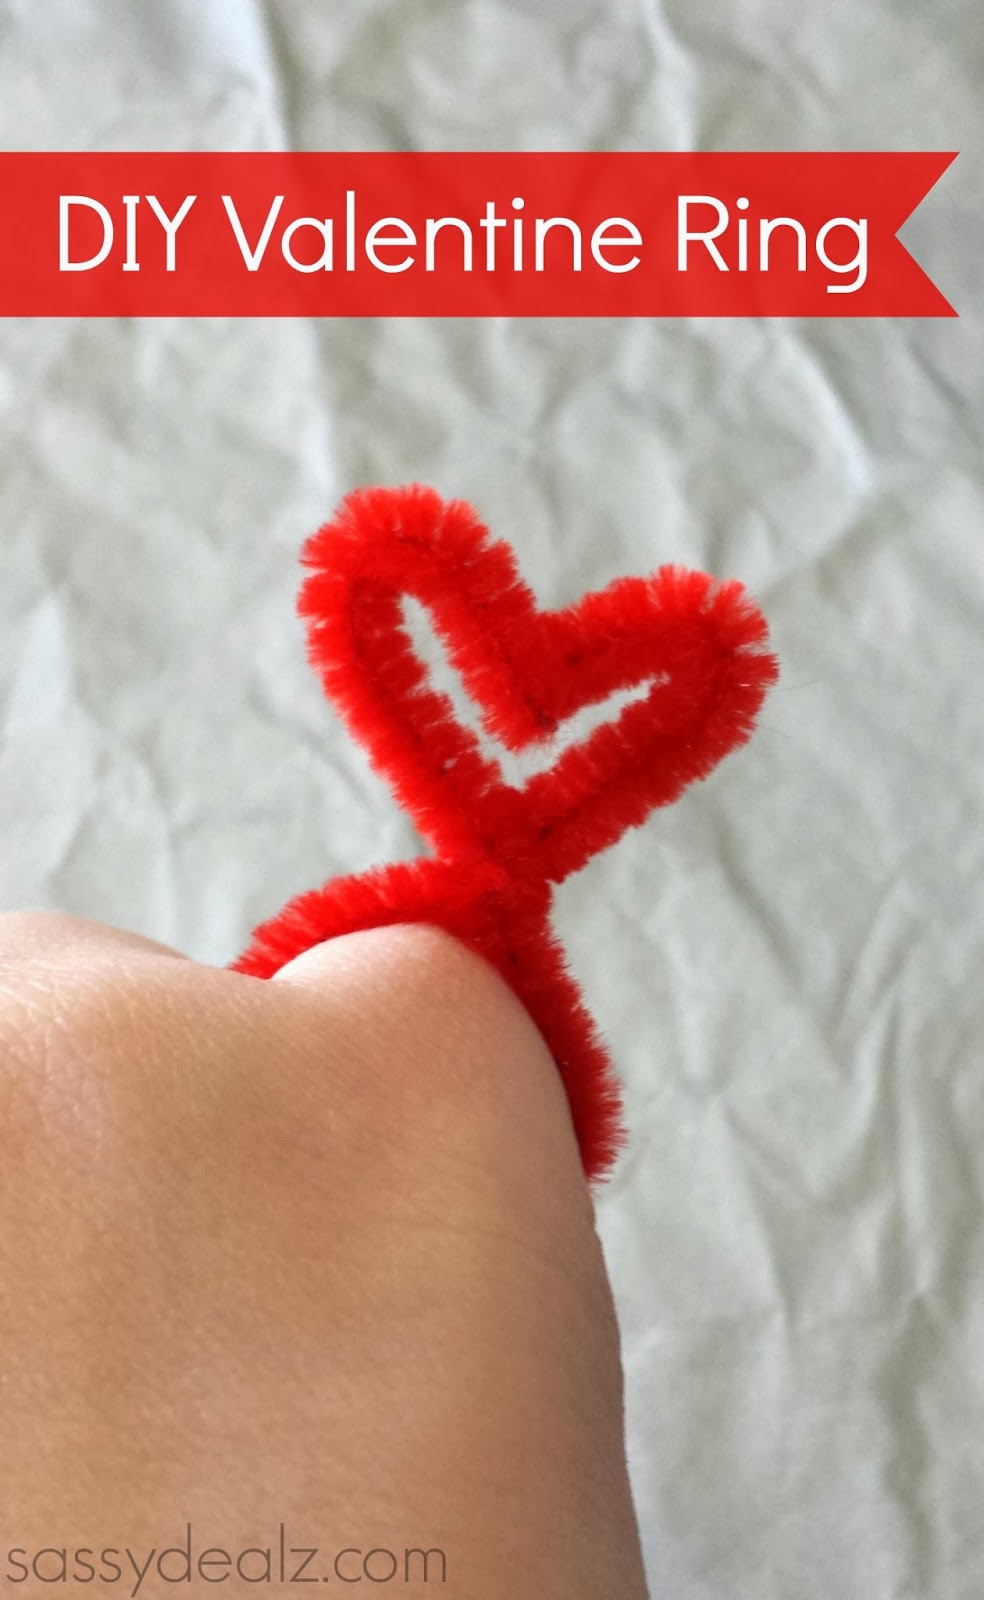 diy-valentine-pipecleaner-ring